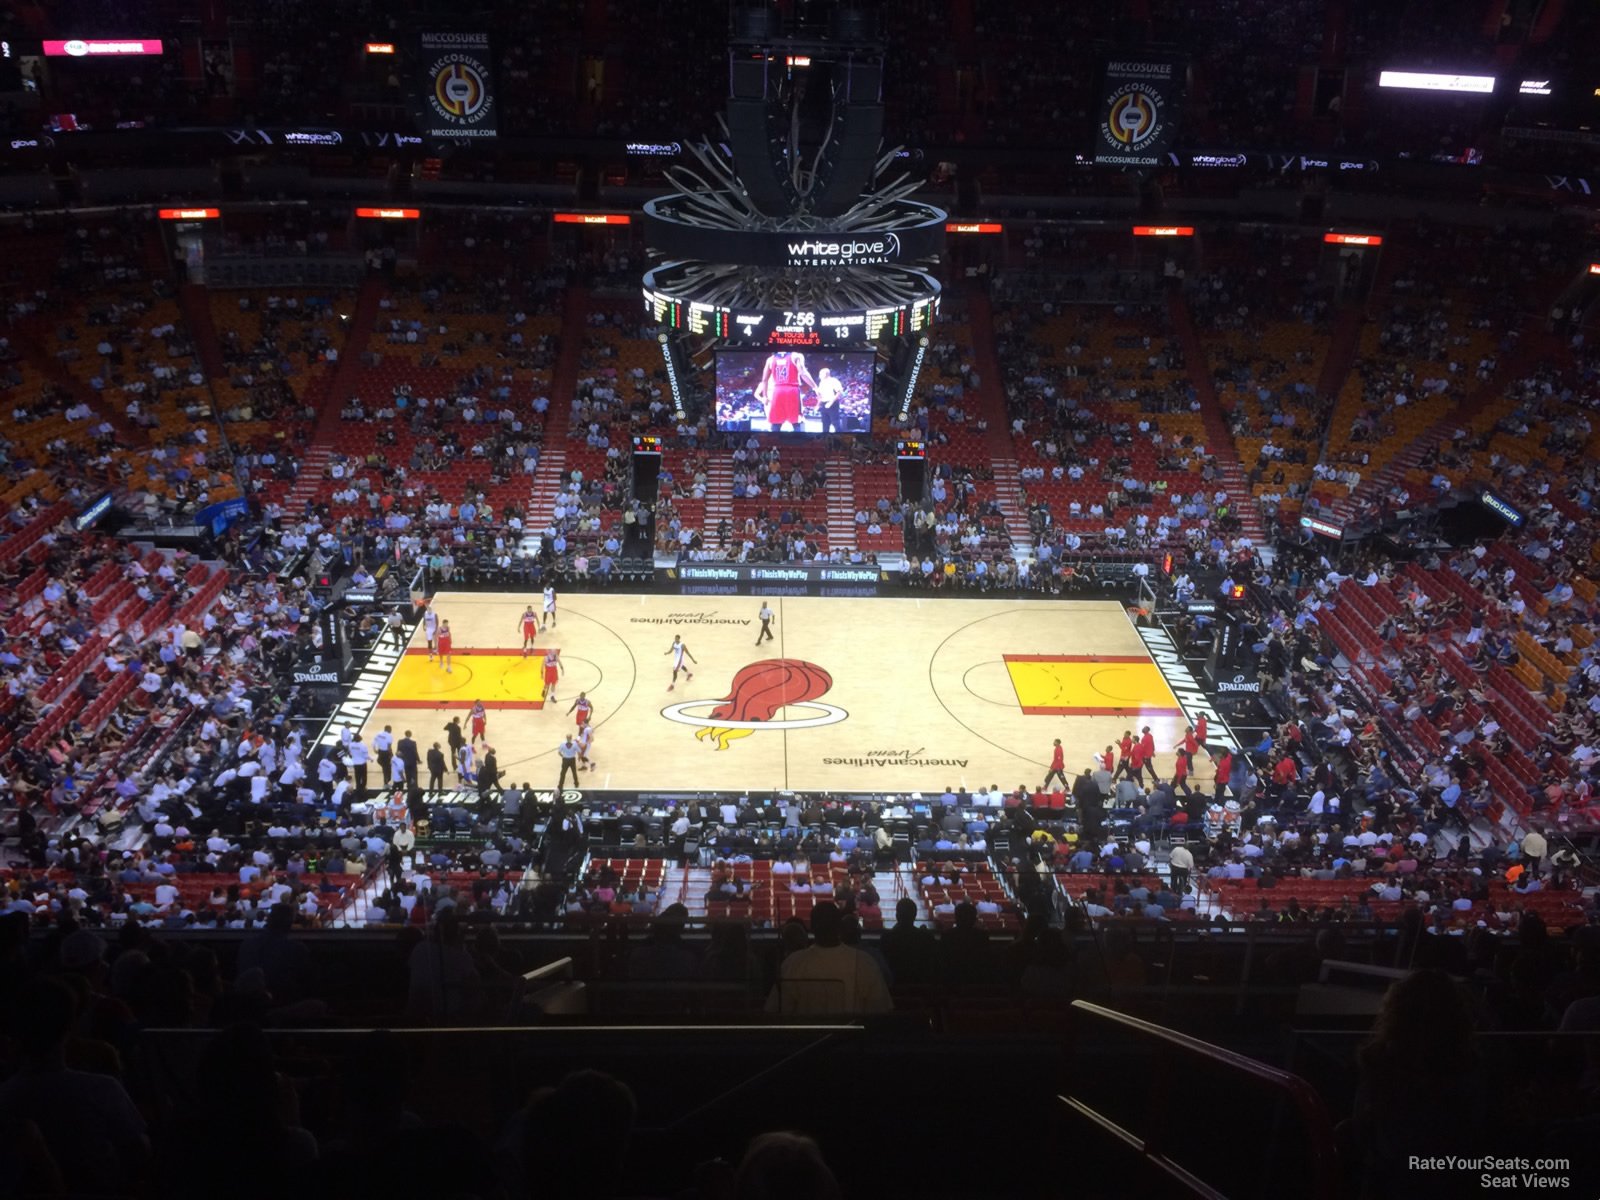 section 309, row 14 seat view  for basketball - miami-dade arena